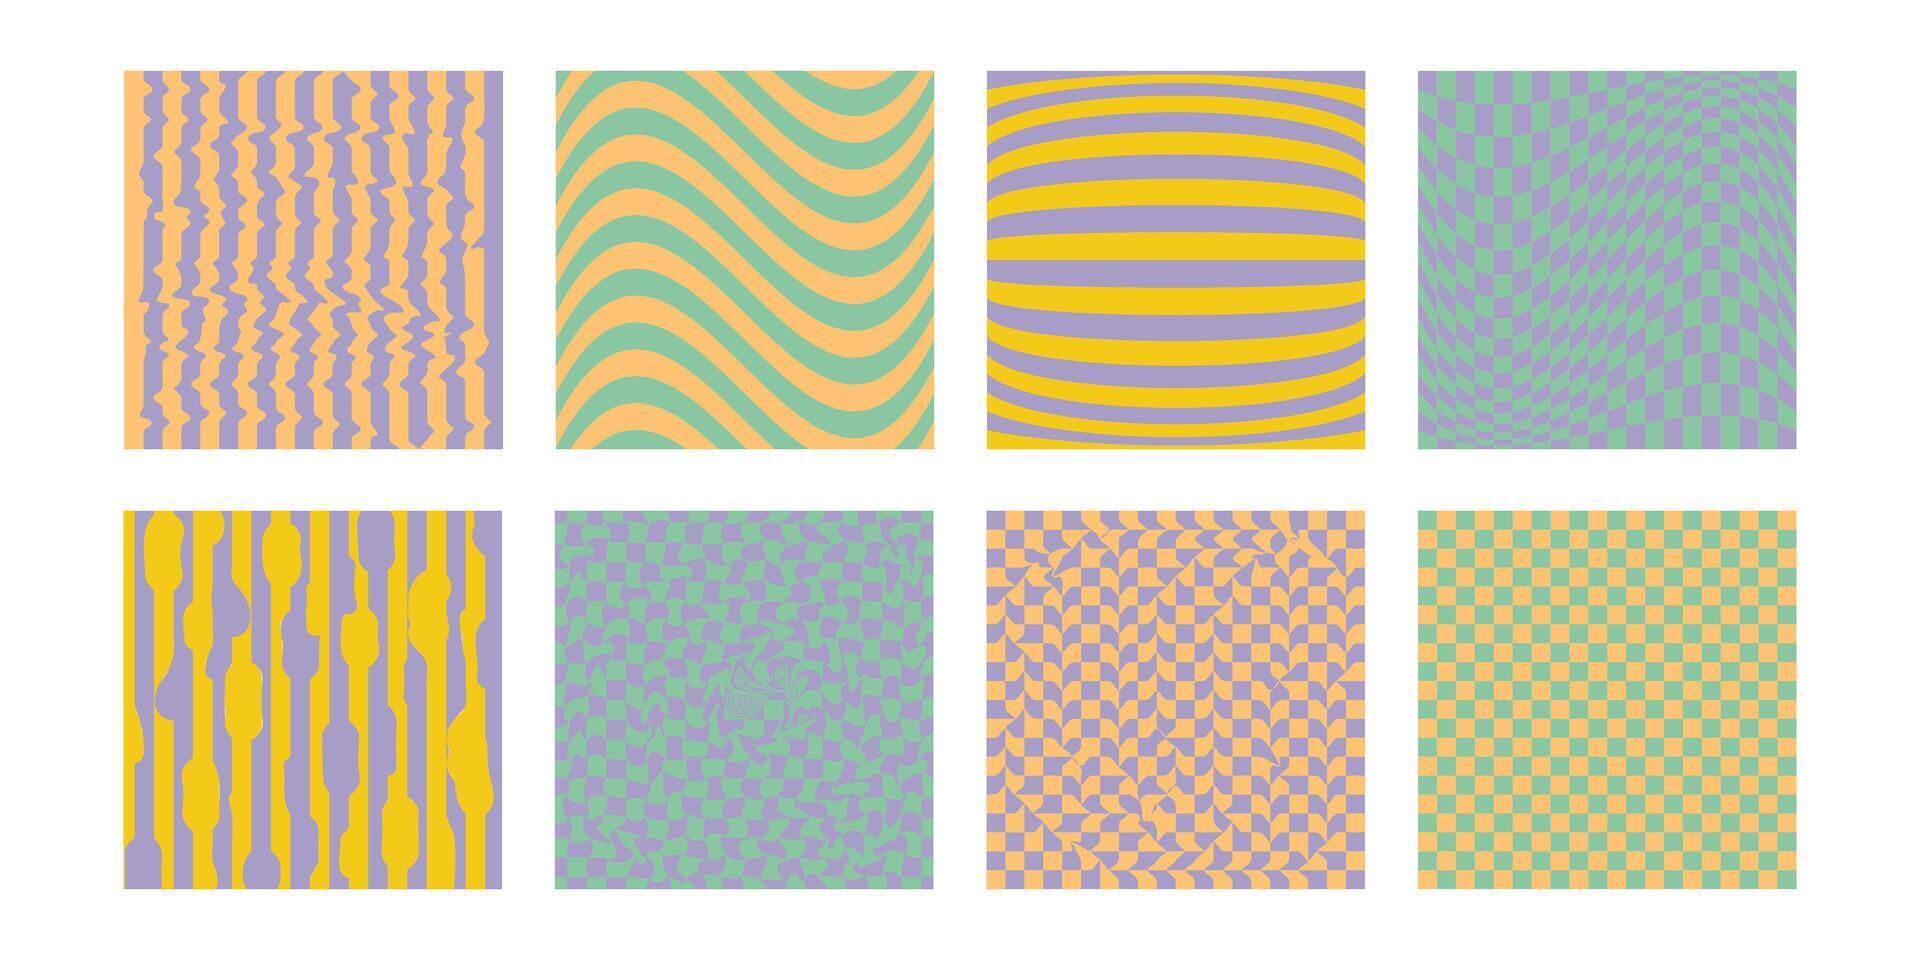 Groovy hippie chessboard pattern set. Retro 60s 70s psychedelic design. Gingham vintage vector wallpaper collection for print templates.